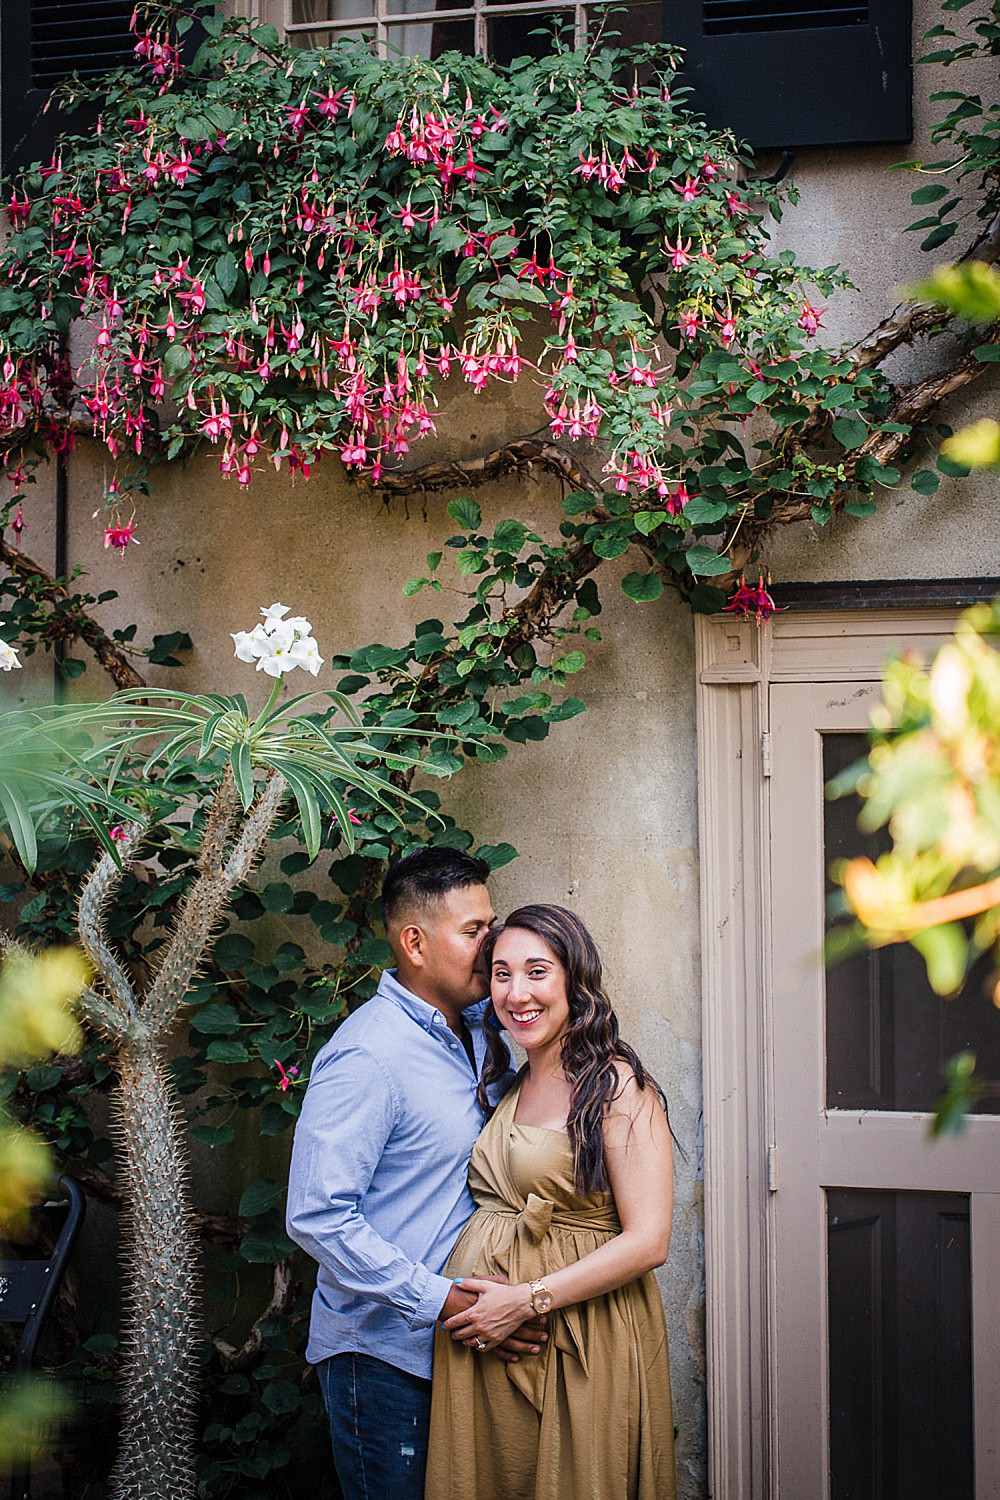 Conestoga House and Gardens Summer Maternity Session in Lancaster PA